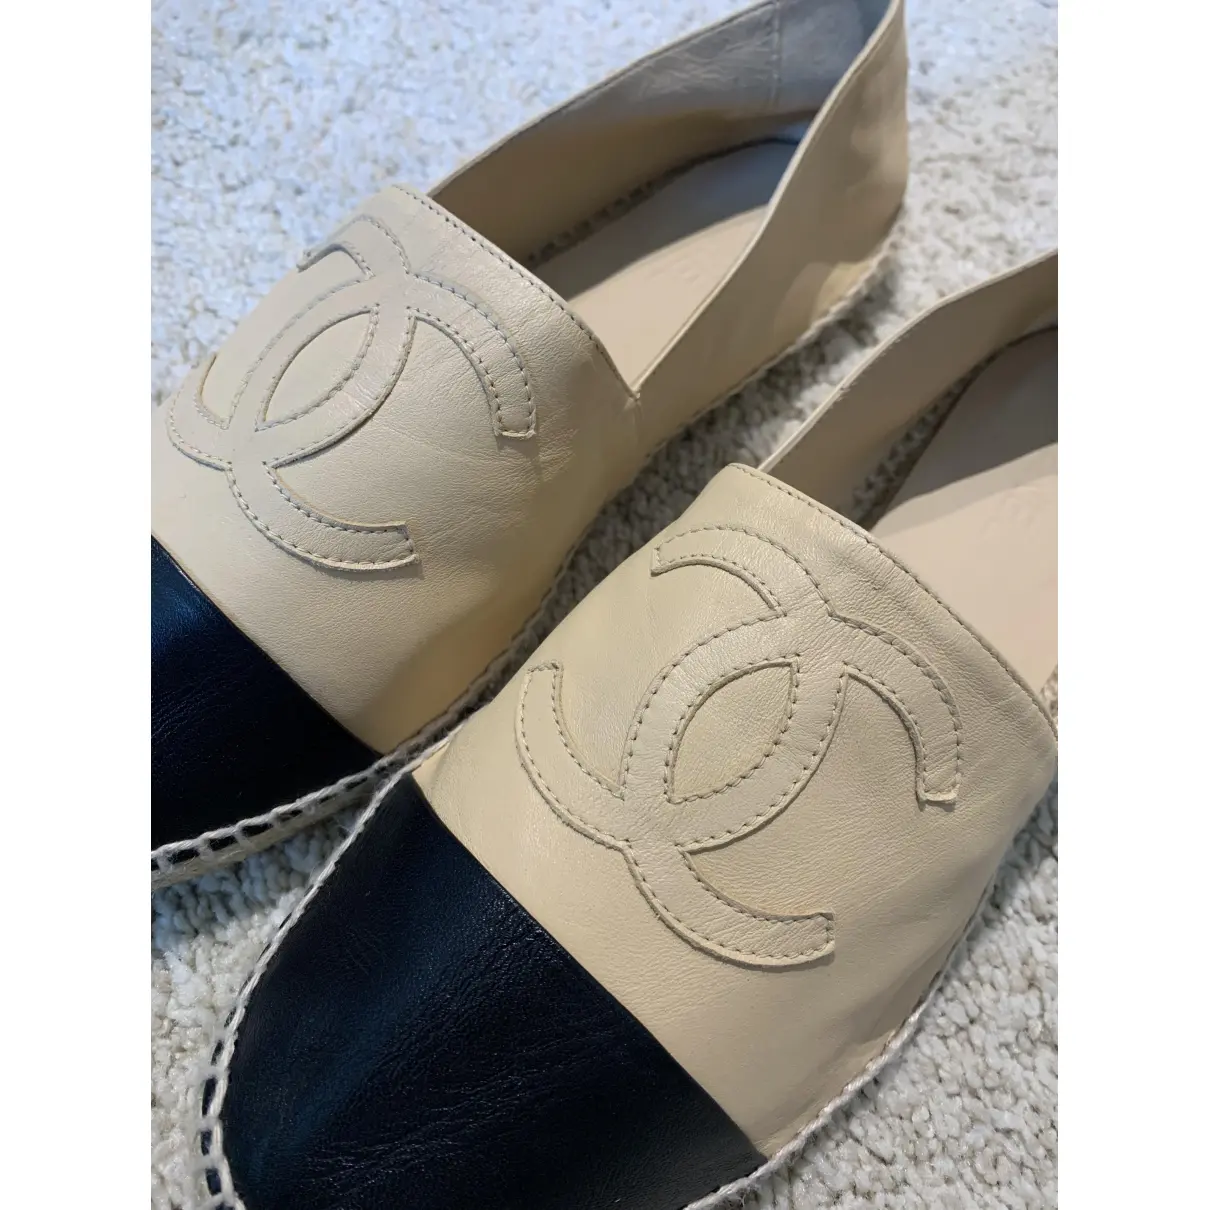 Chanel Leather espadrilles for sale